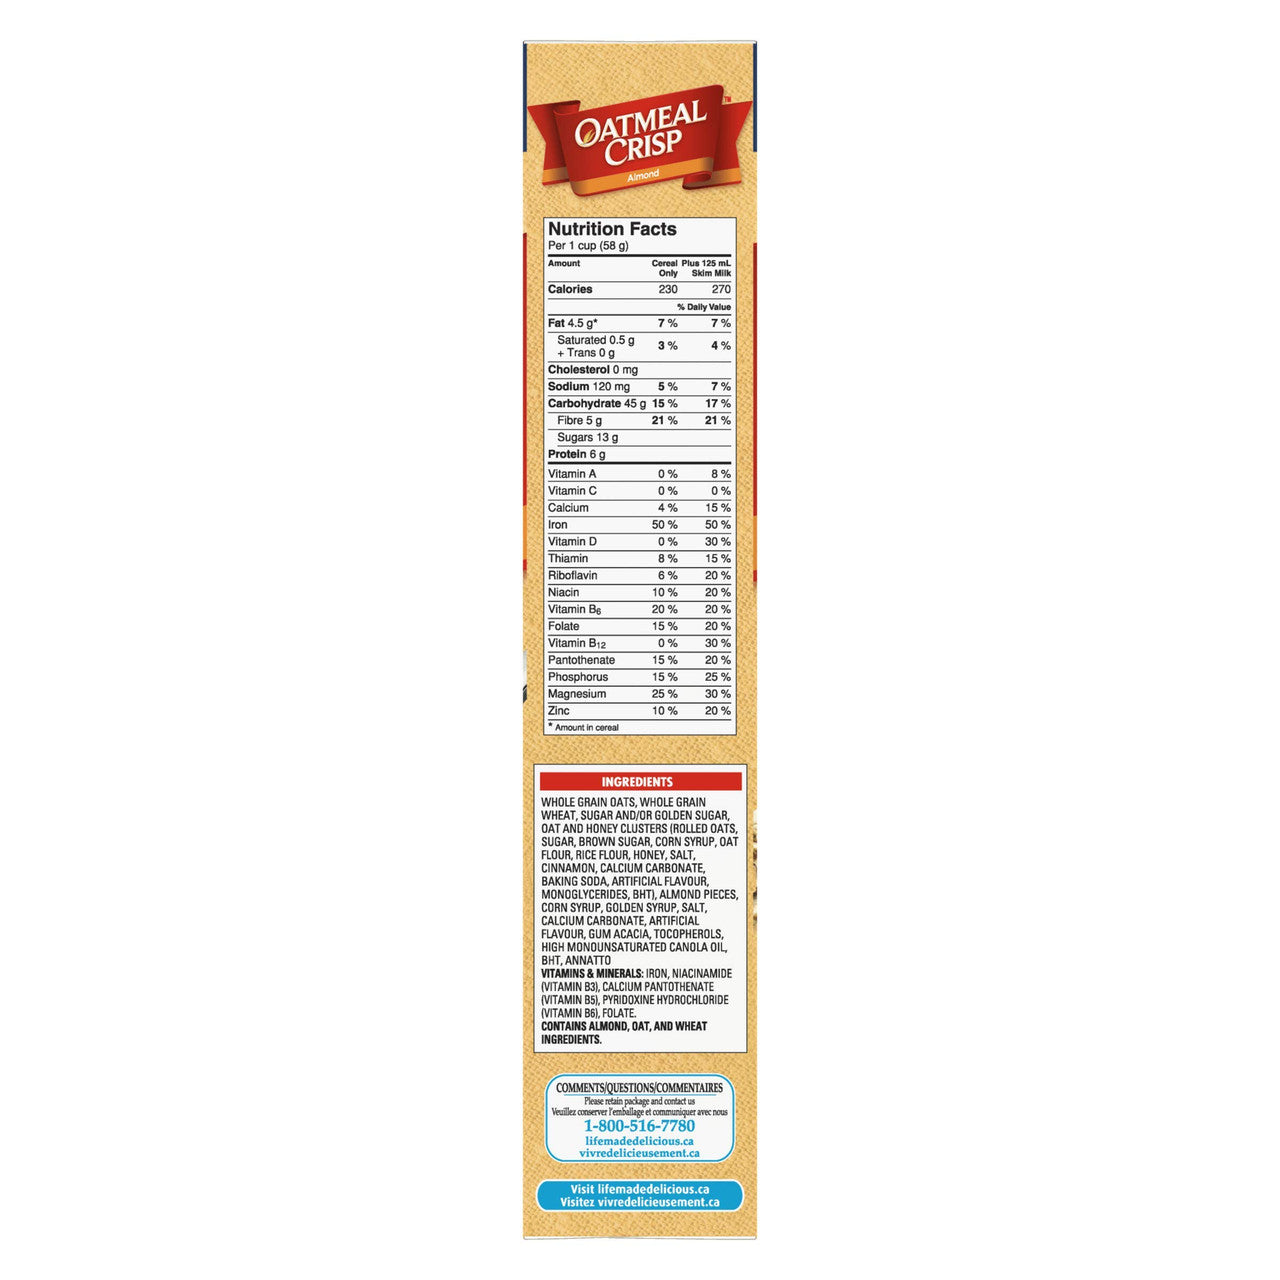 General Mills Oatmeal Crisp Almond Cereal, Family Size, 628g/22.2 oz., {Imported from Canada}